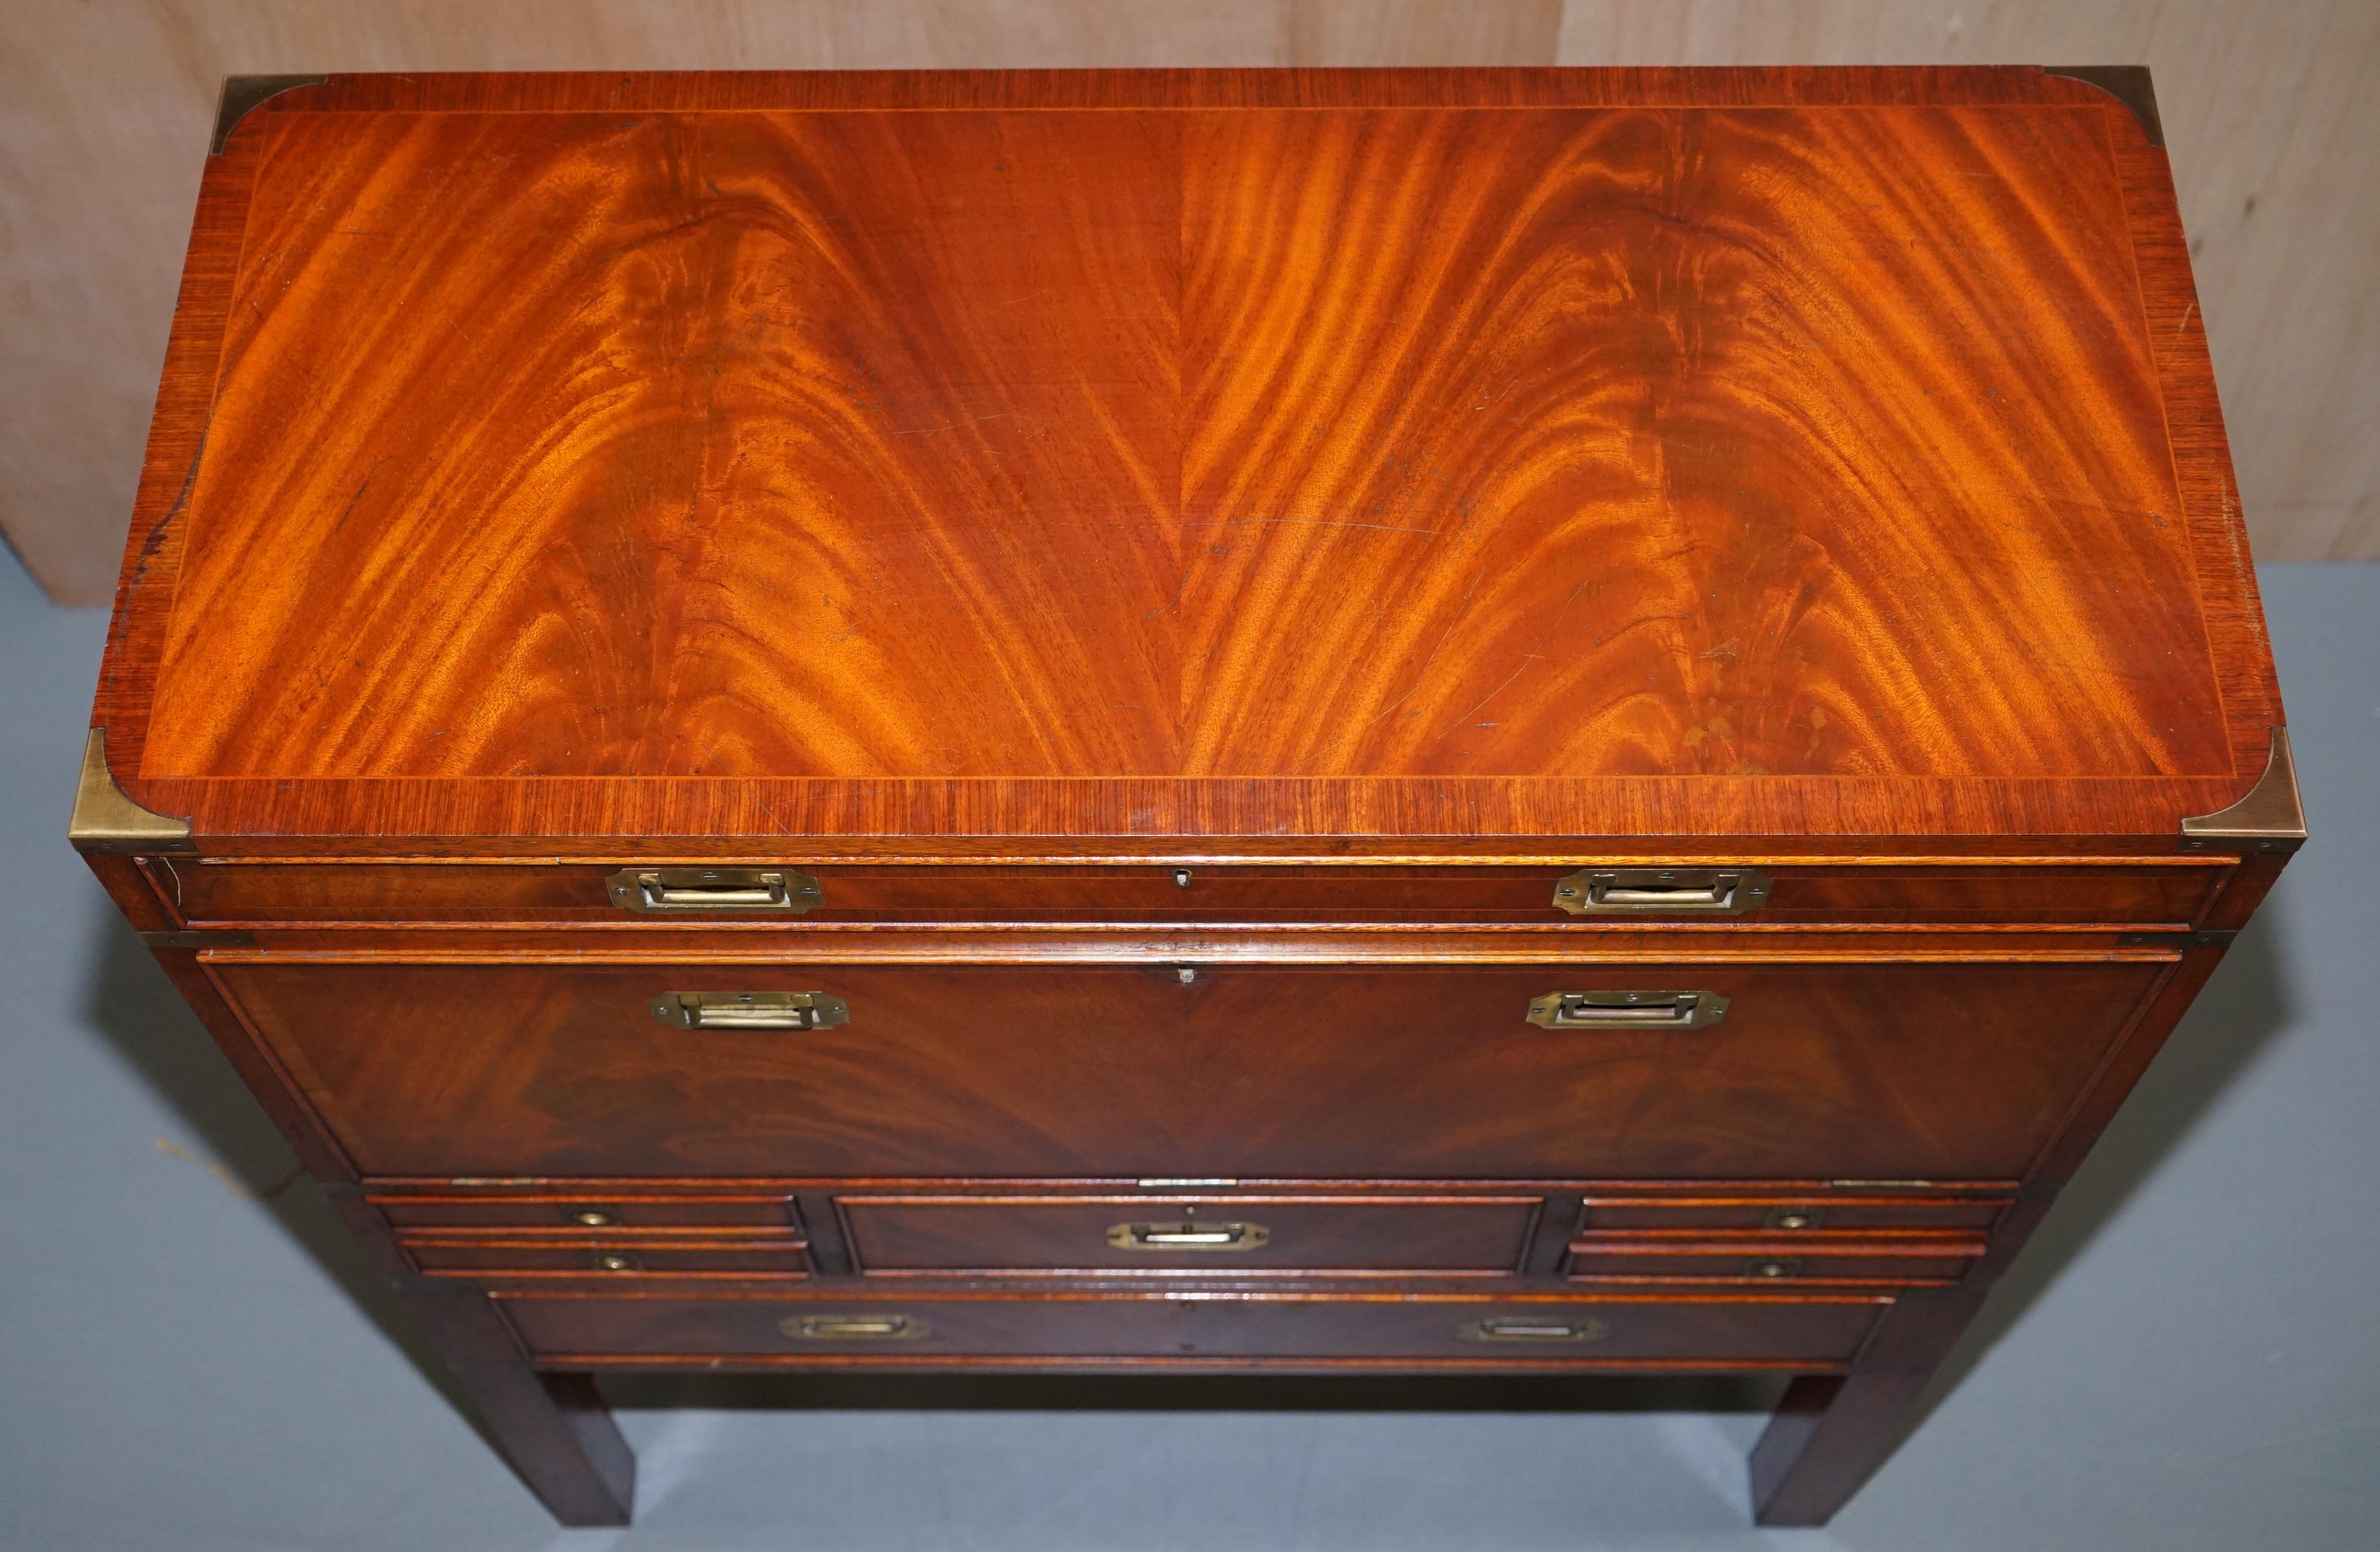 Hand-Crafted Vintage Flamed Mahogany Military Campaign Chest of Drawers Drop Secretaire Desk